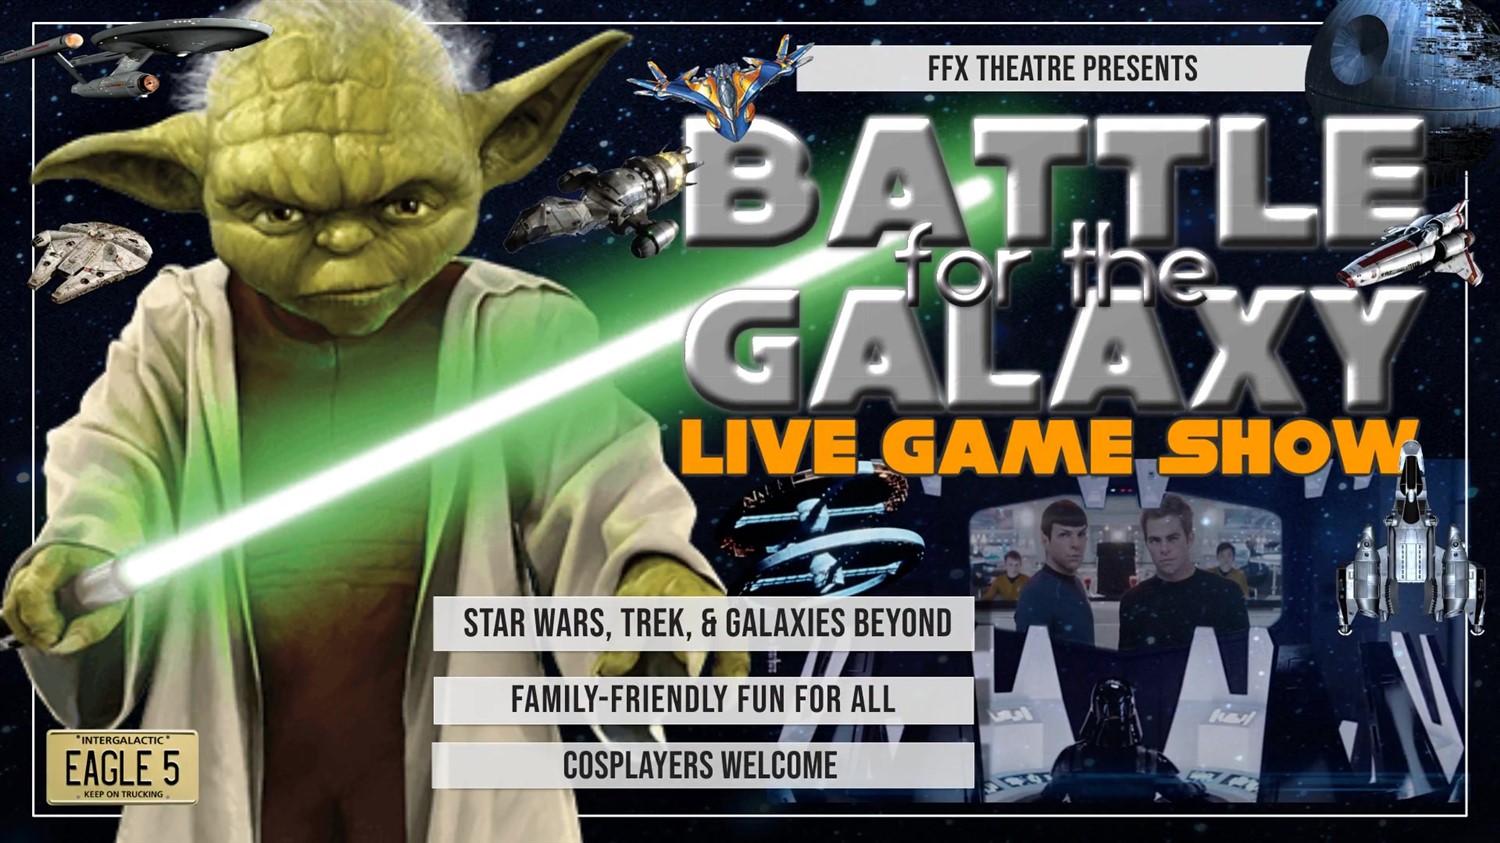 BATTLE FOR THE GALAXY Live Sci-Fi Game Show with Costume Cosplay Contest! on Oct 19, 19:00@FFX Theatre - Pick a seat, Buy tickets and Get information on Family Fun Xperience tickets.ffxshow.org